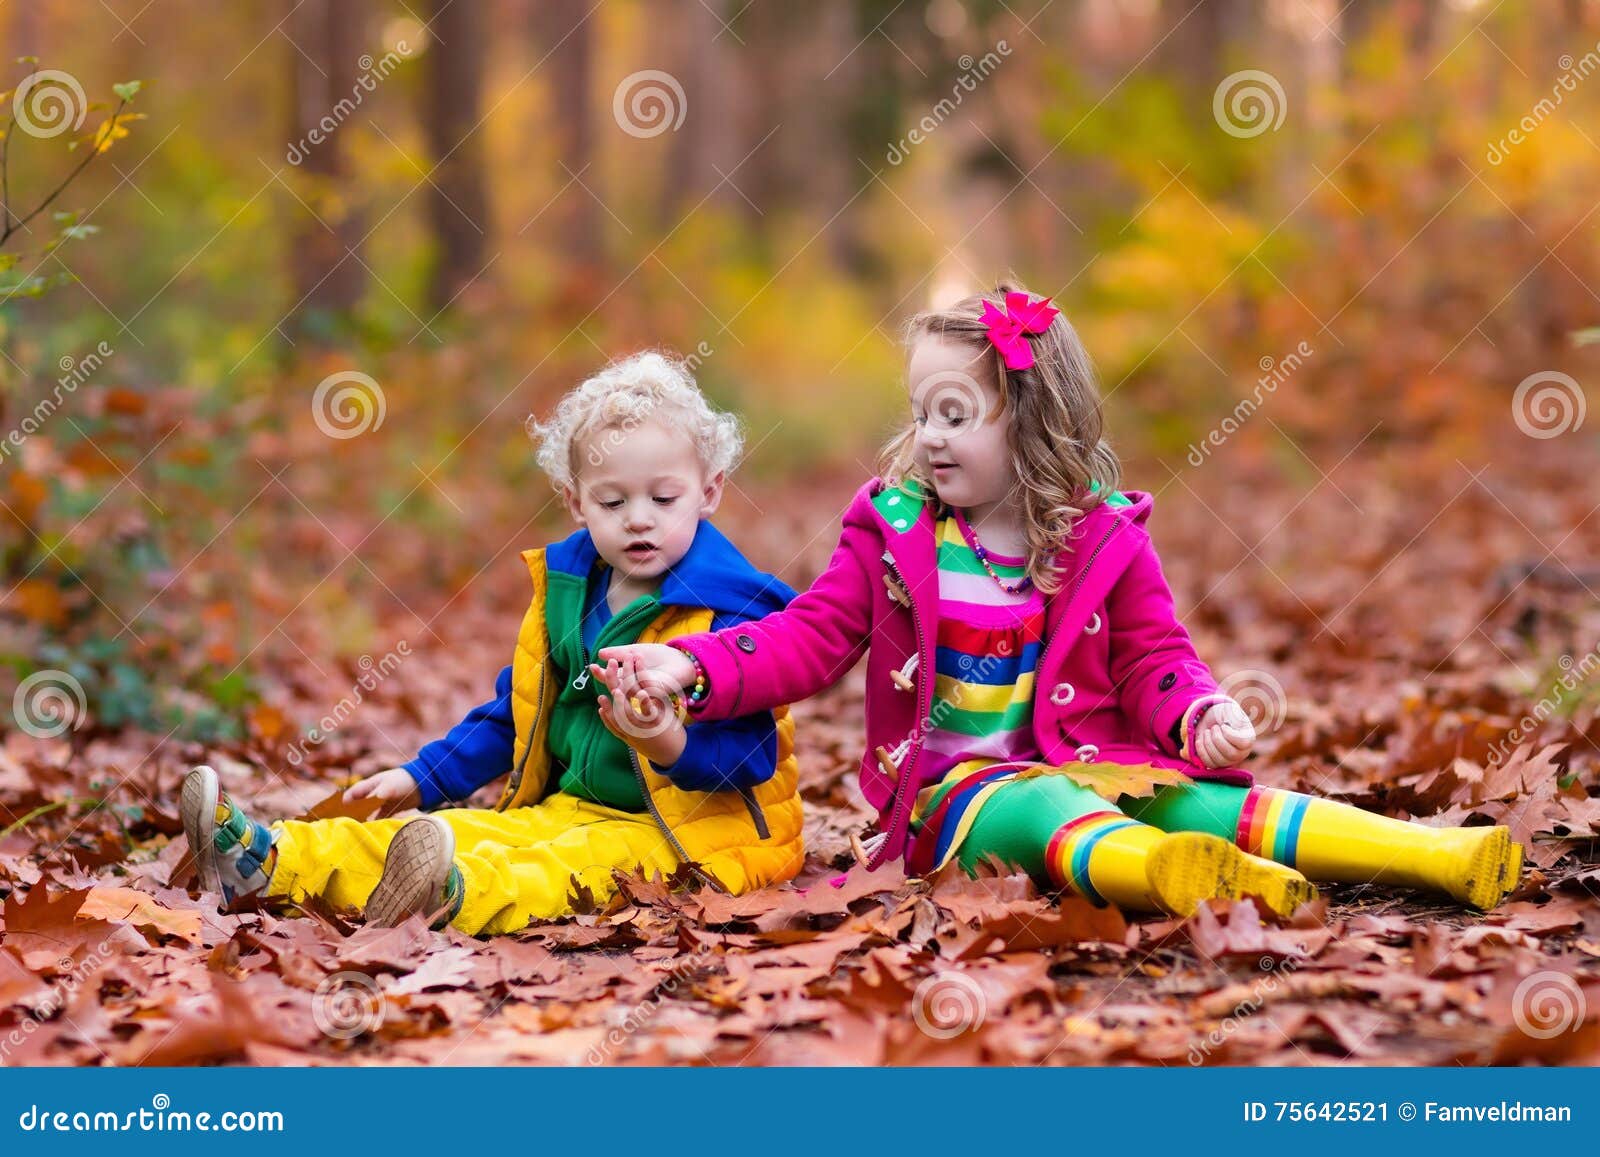 Kids Playing In Autumn Park Stock Image Image Of Little Maple 75642521